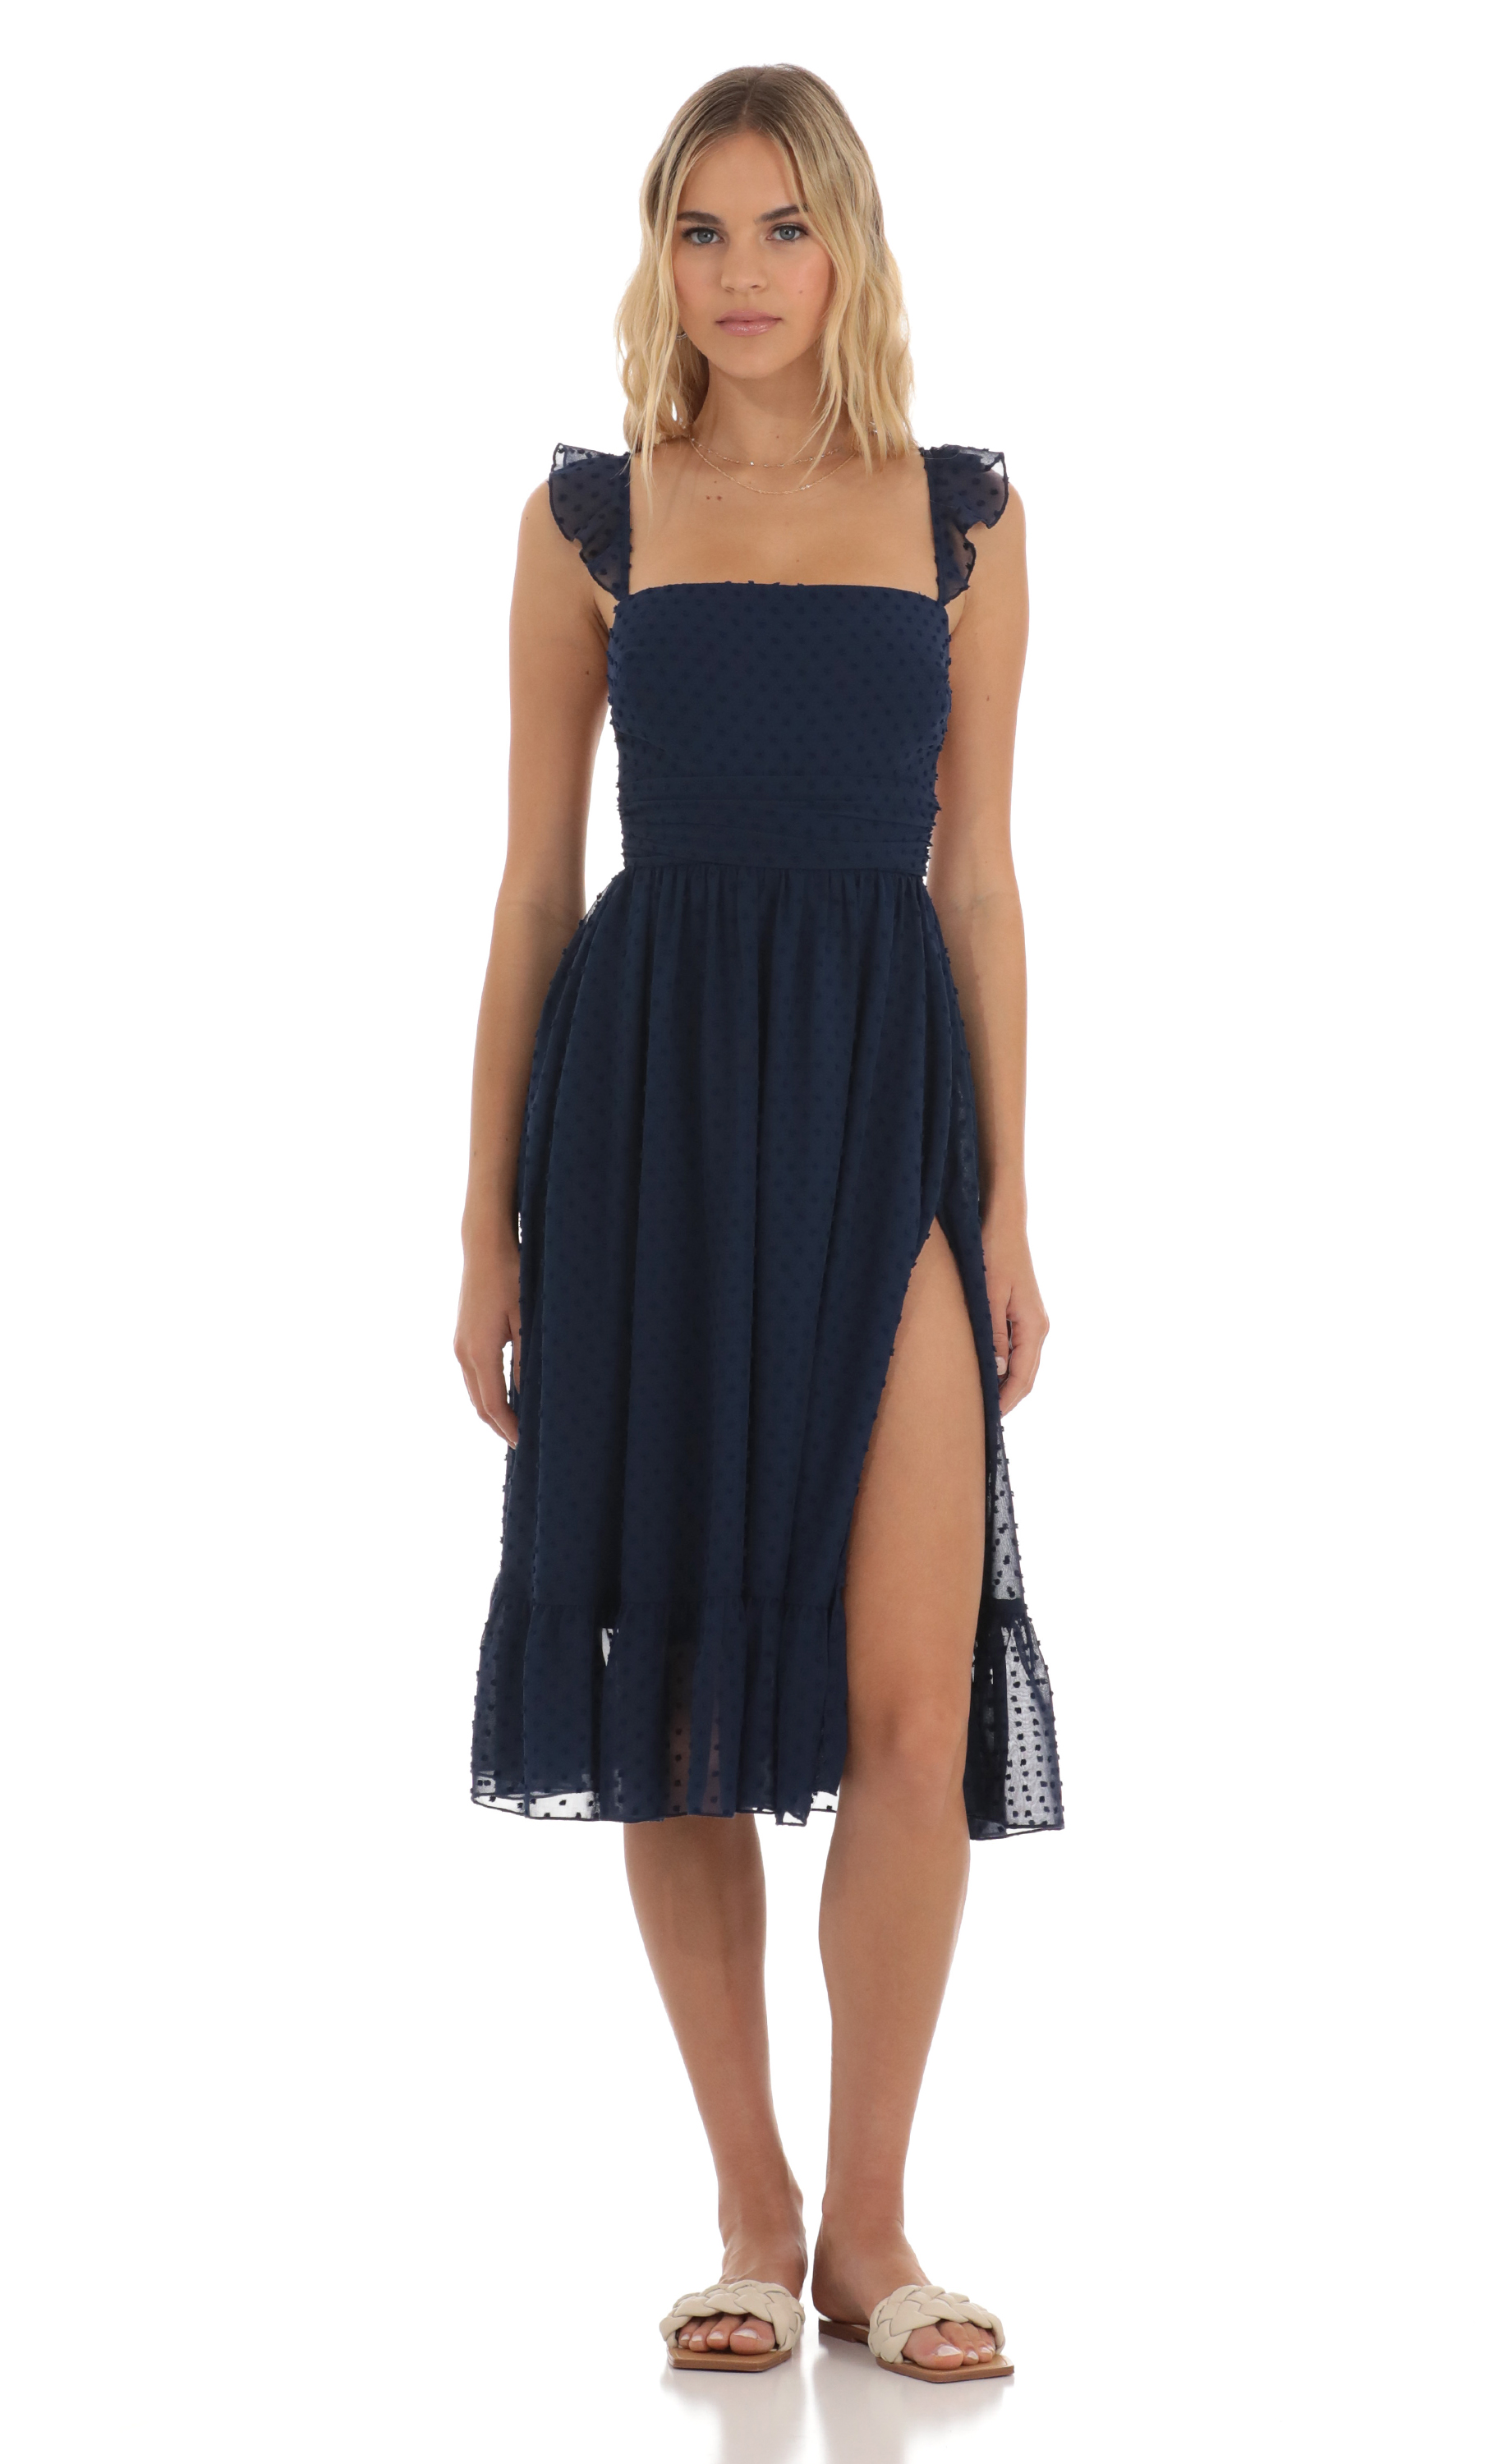 Dotted Chiffon Dress in Navy